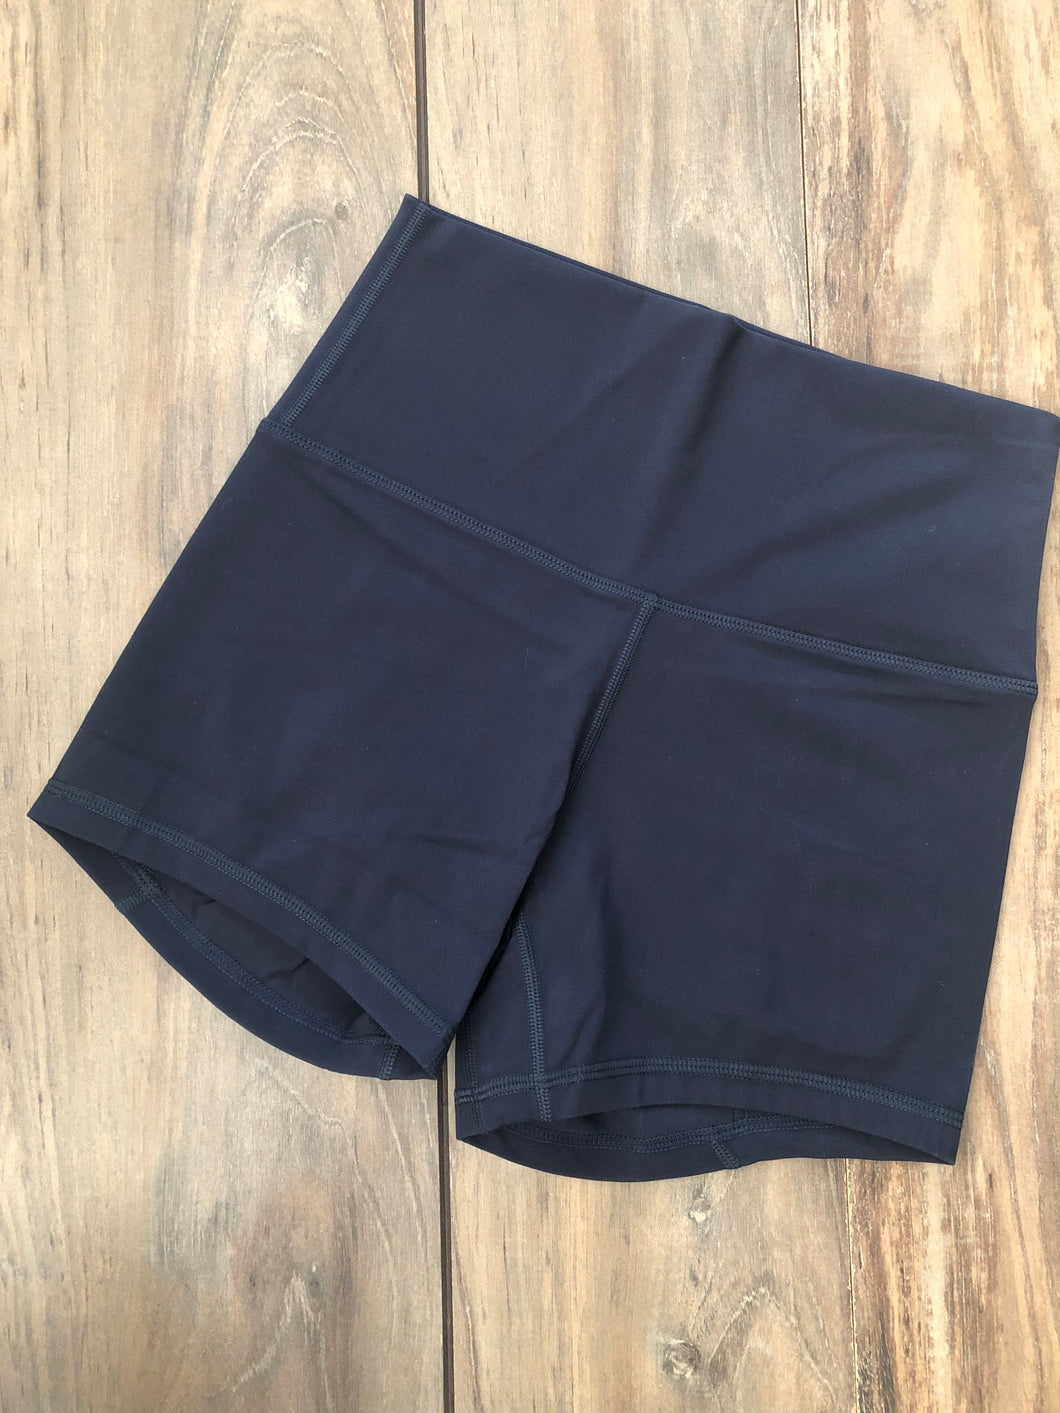 The Bay Super Stretch Teen Shorts